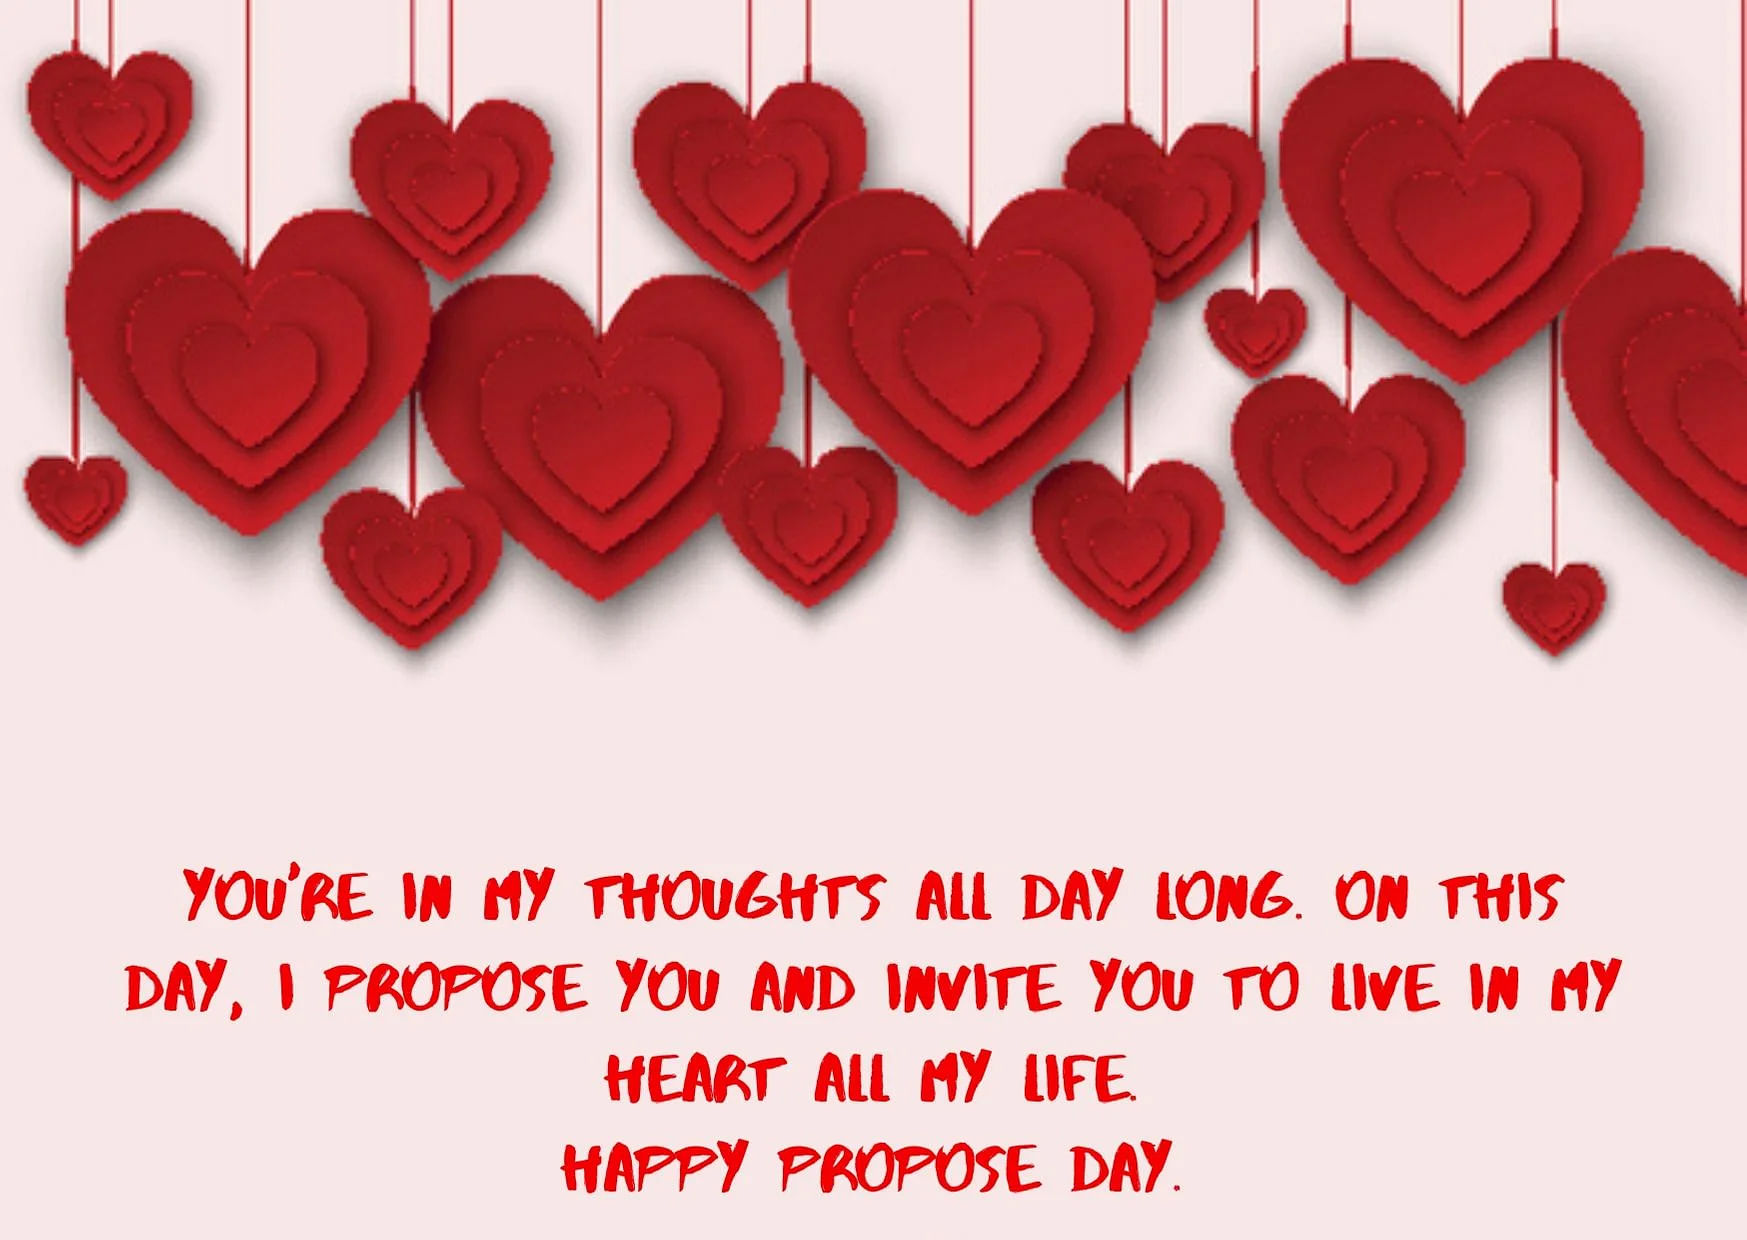 Happy Propose Day 2021 Quotes in English &amp; Hindi. Propose Day Images and  Wishes to Send on WhatsApp, Facebook, Instagram &amp; upload as WhatsApp &amp;  Instagram story